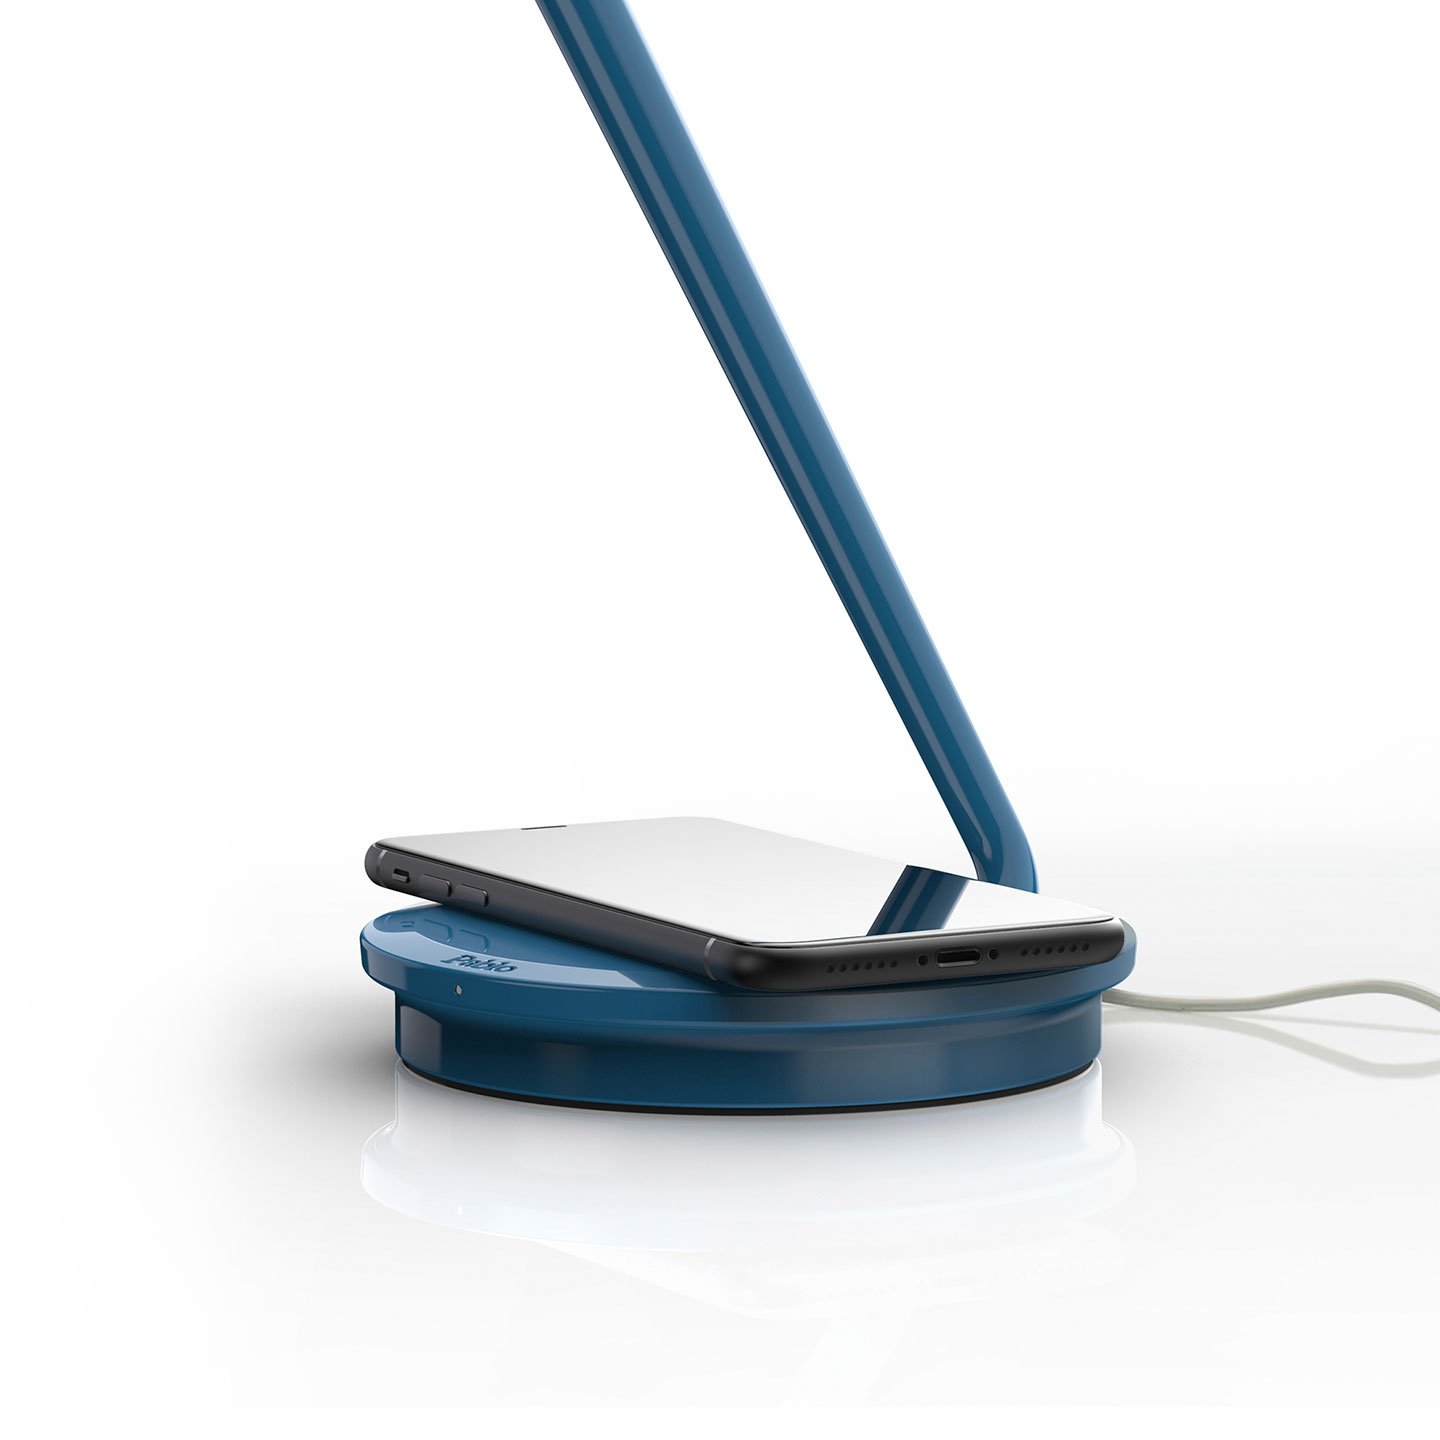 Haworth Pixo Plus Lighting in blue color with phone on charging pad